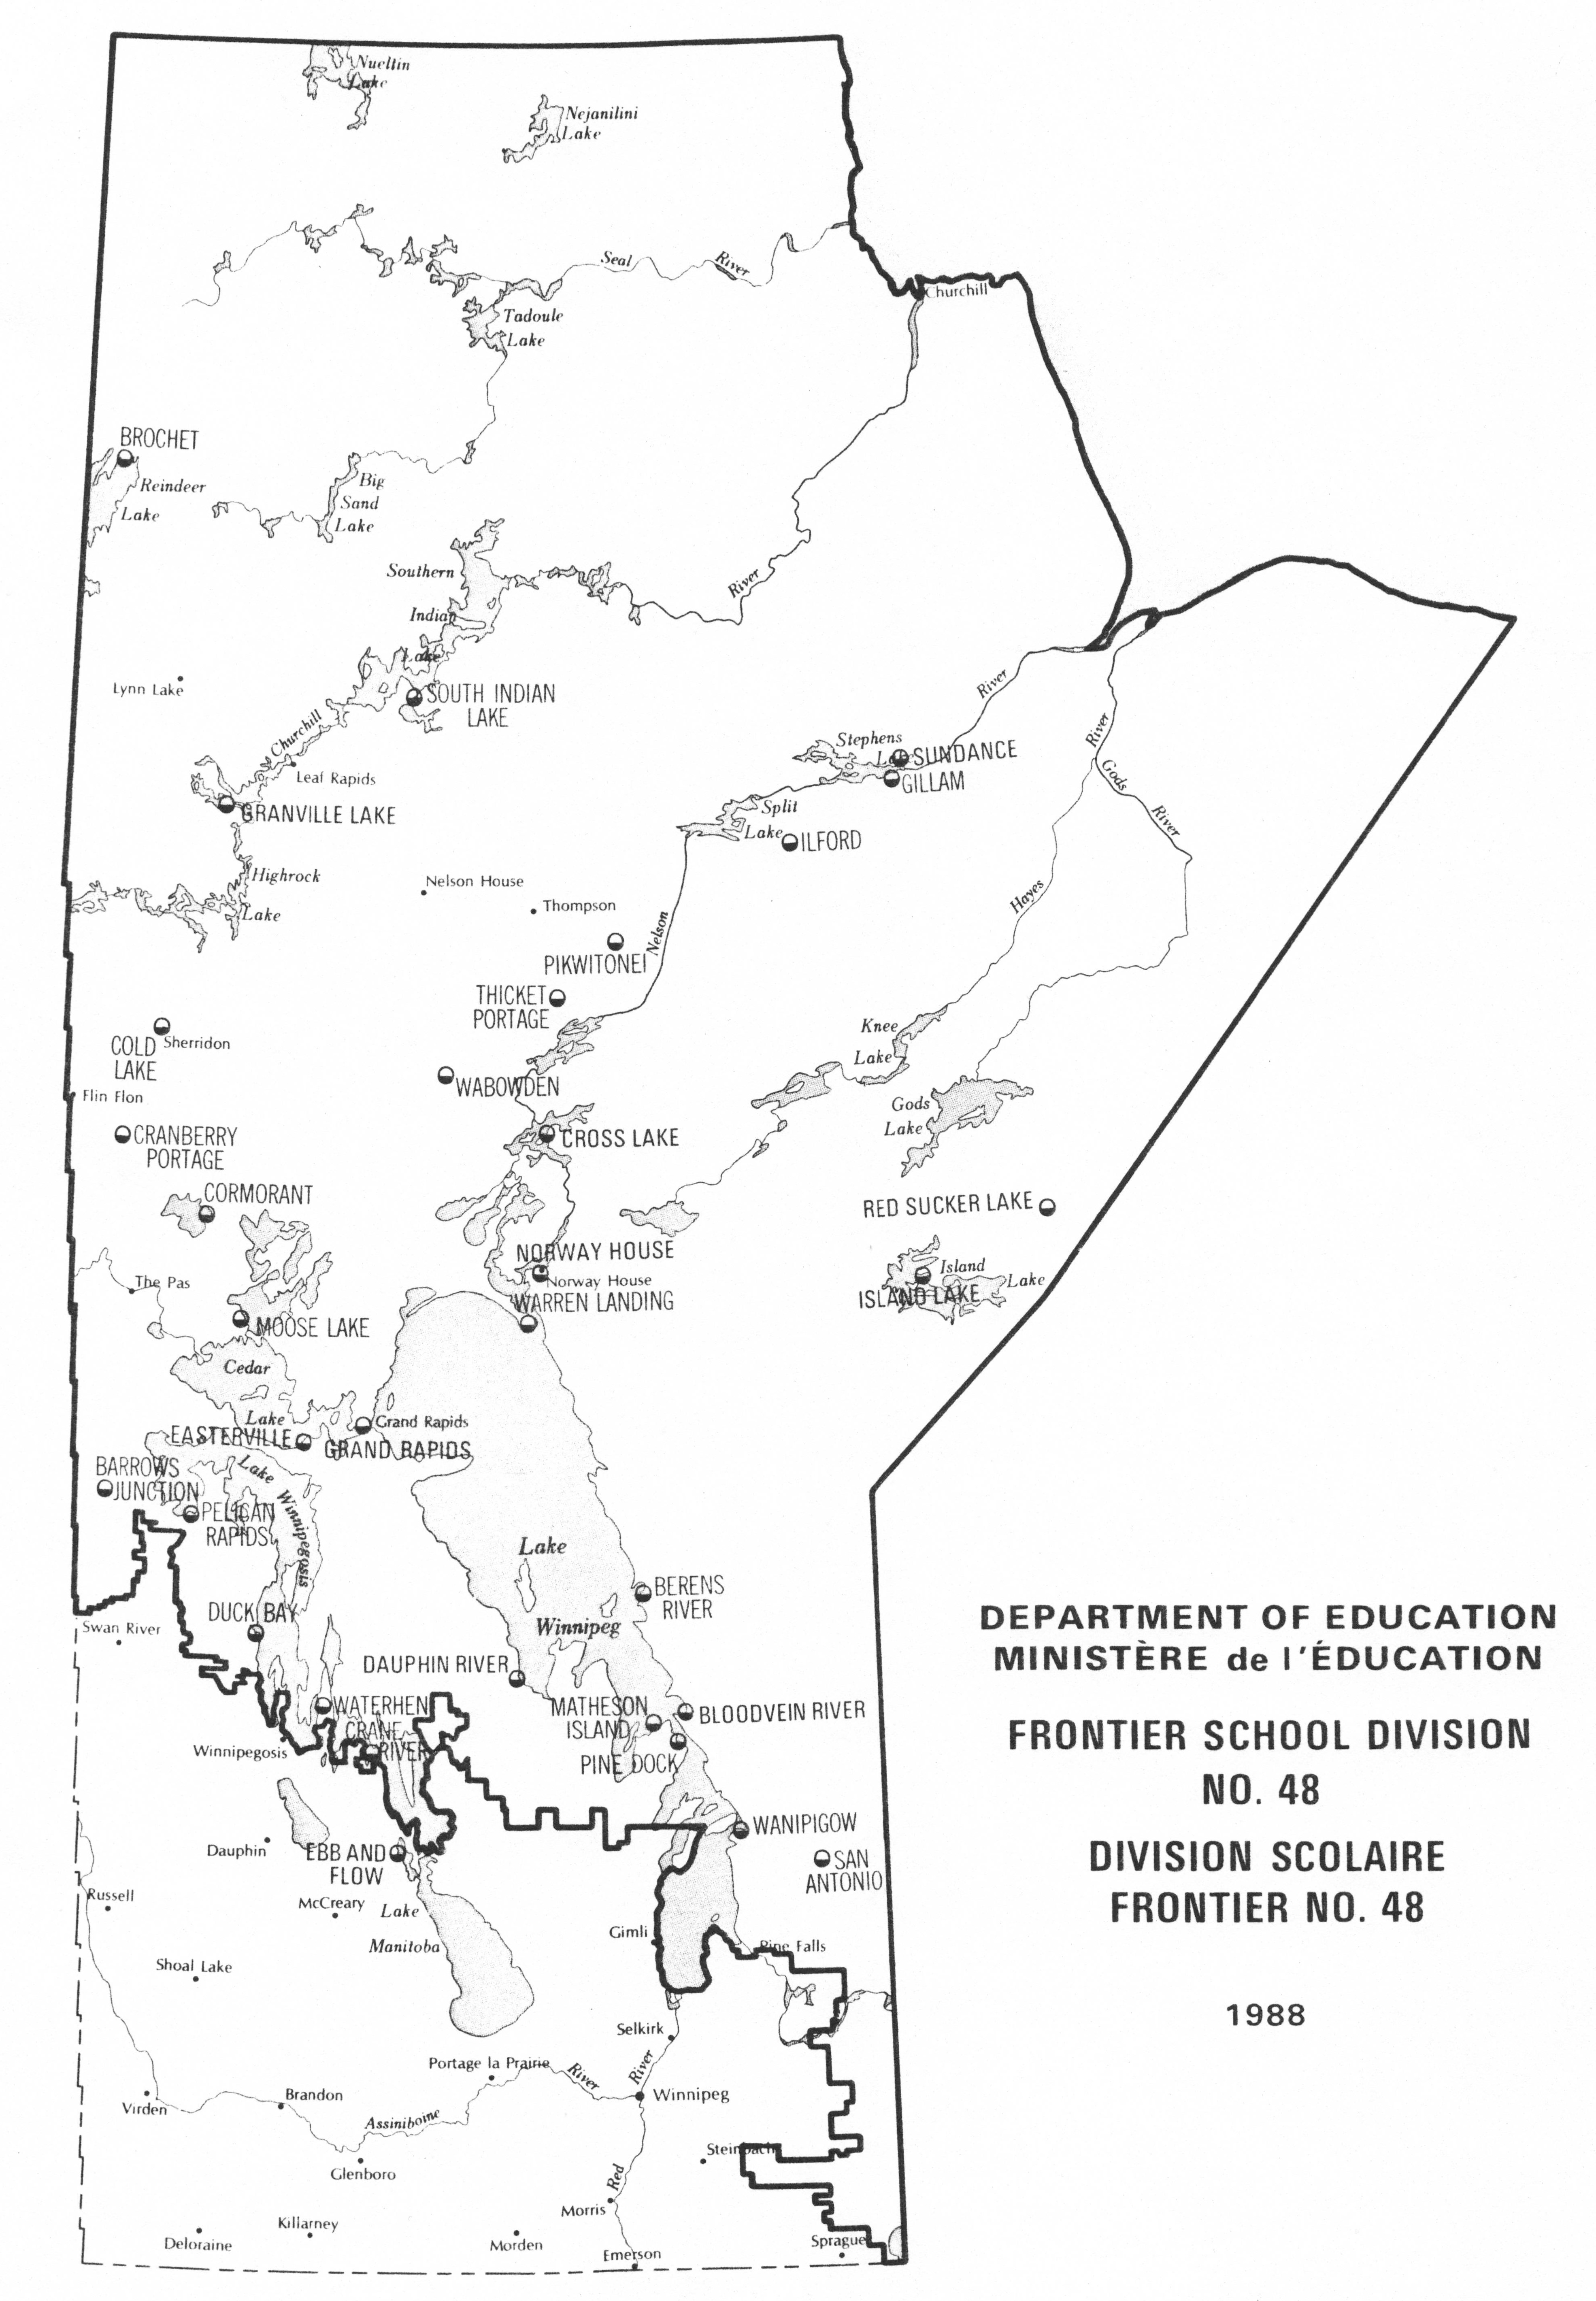 map of Frontier School Division